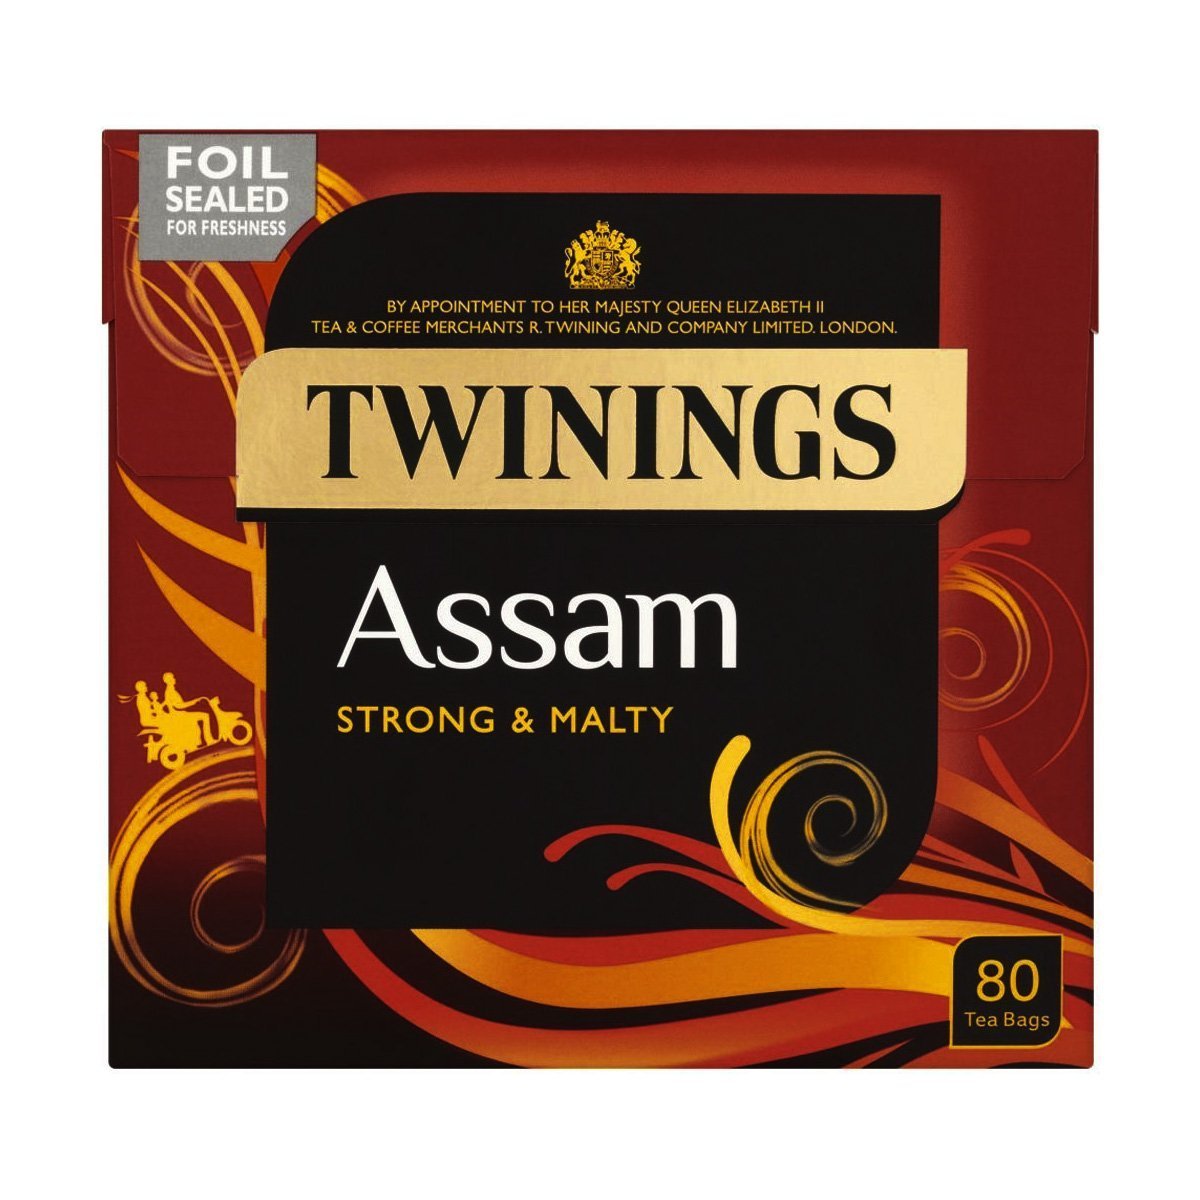 Twinings Assam Strong and Malty, 80 Tea Bags